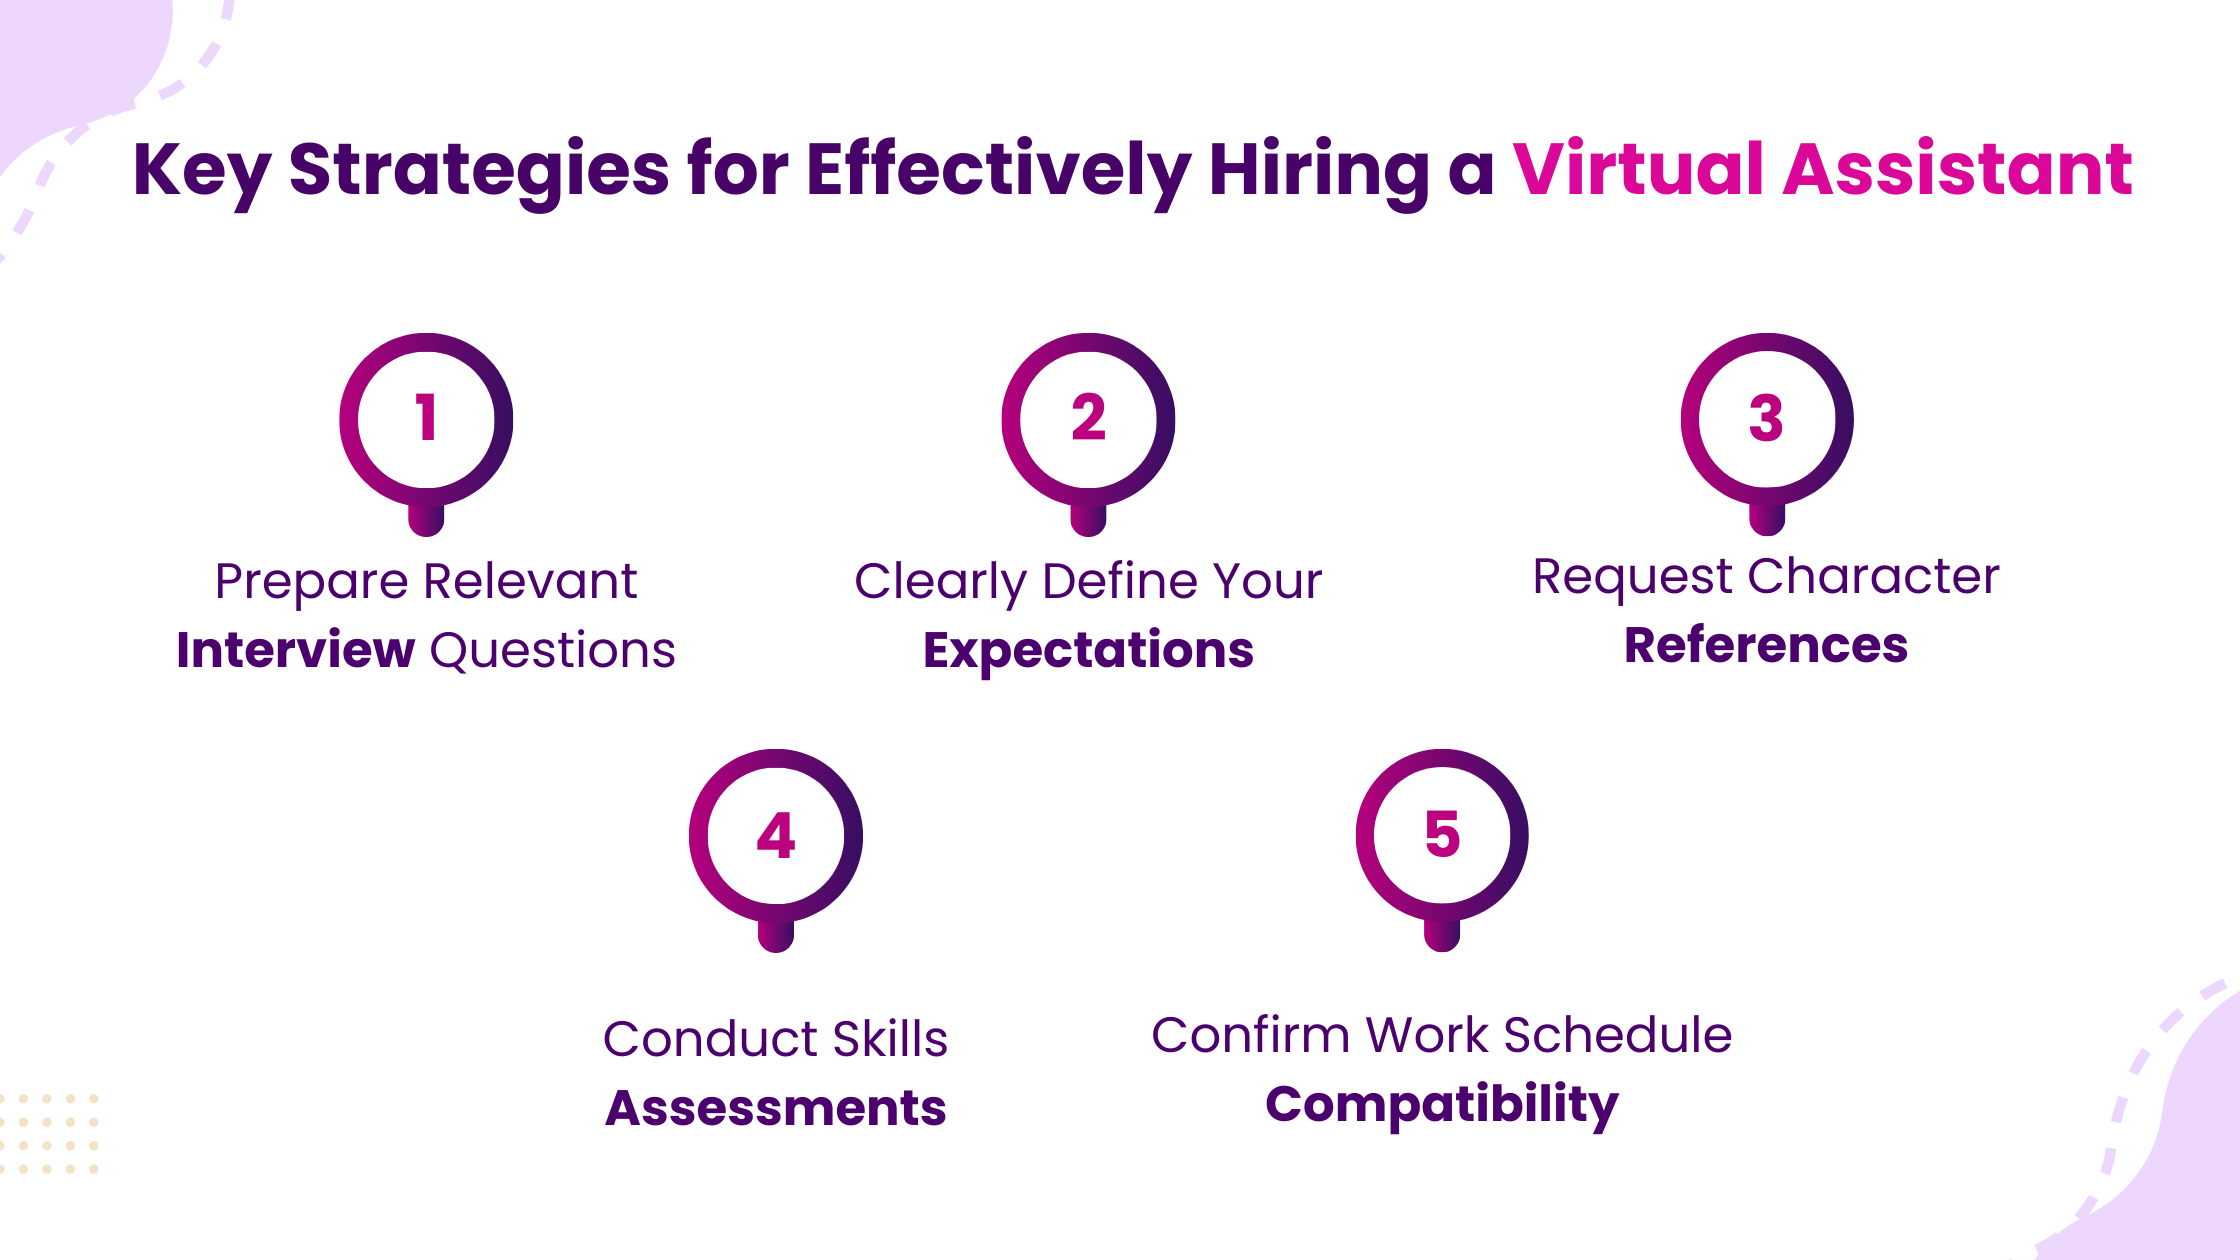 Key strategies for effectively hiring a virtual assistant